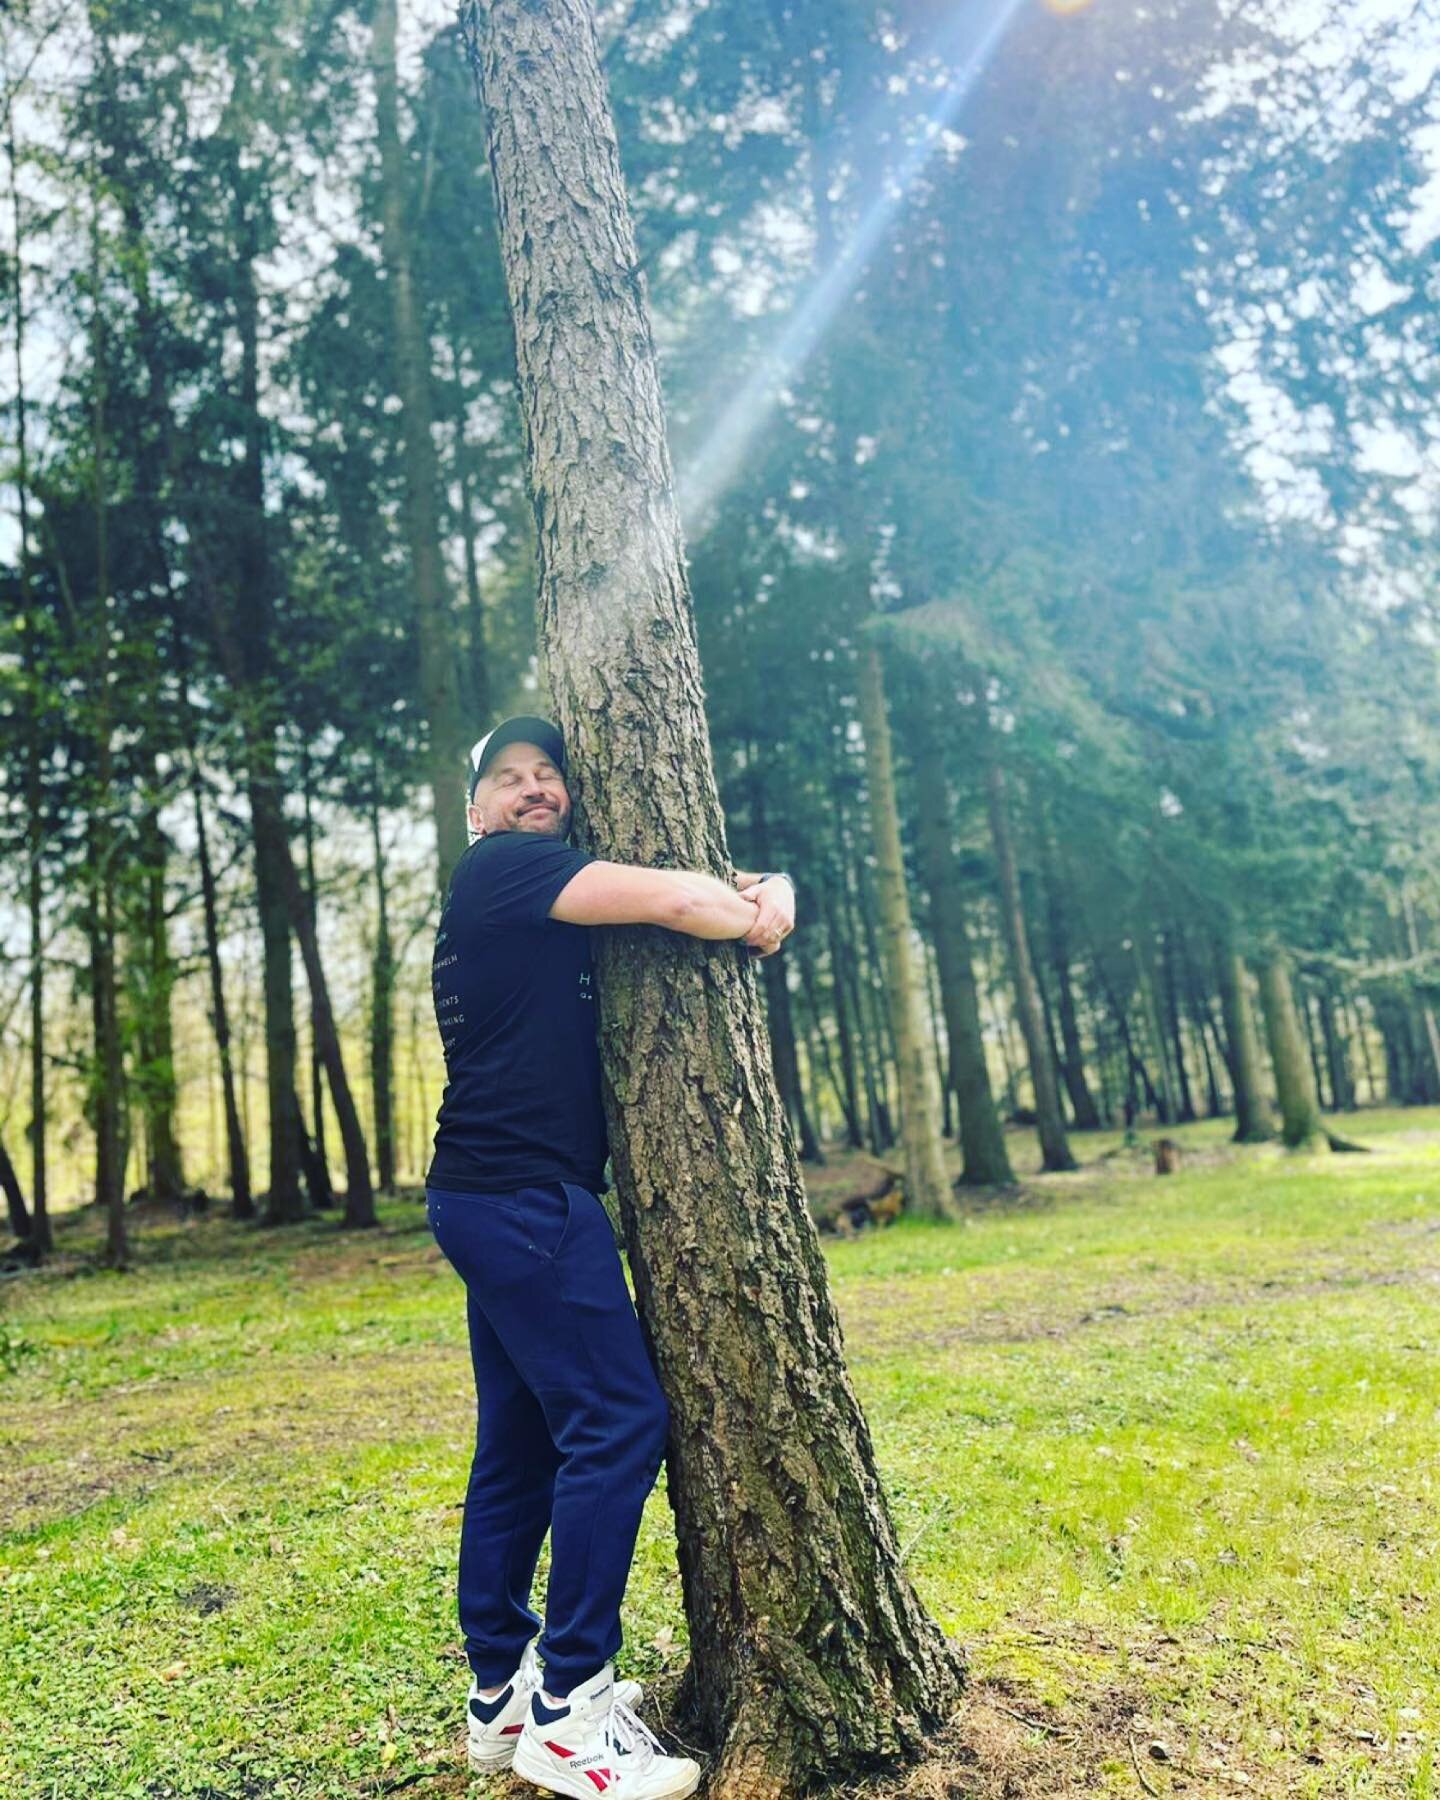 Forest bathing, or shinrin-yoku, is a wellness trend for relaxing and reconnecting with nature. It comes from Japan, but is gaining popularity all over the world.

Did you know hugging a tree increases levels of hormone oxytocin. This hormone is resp